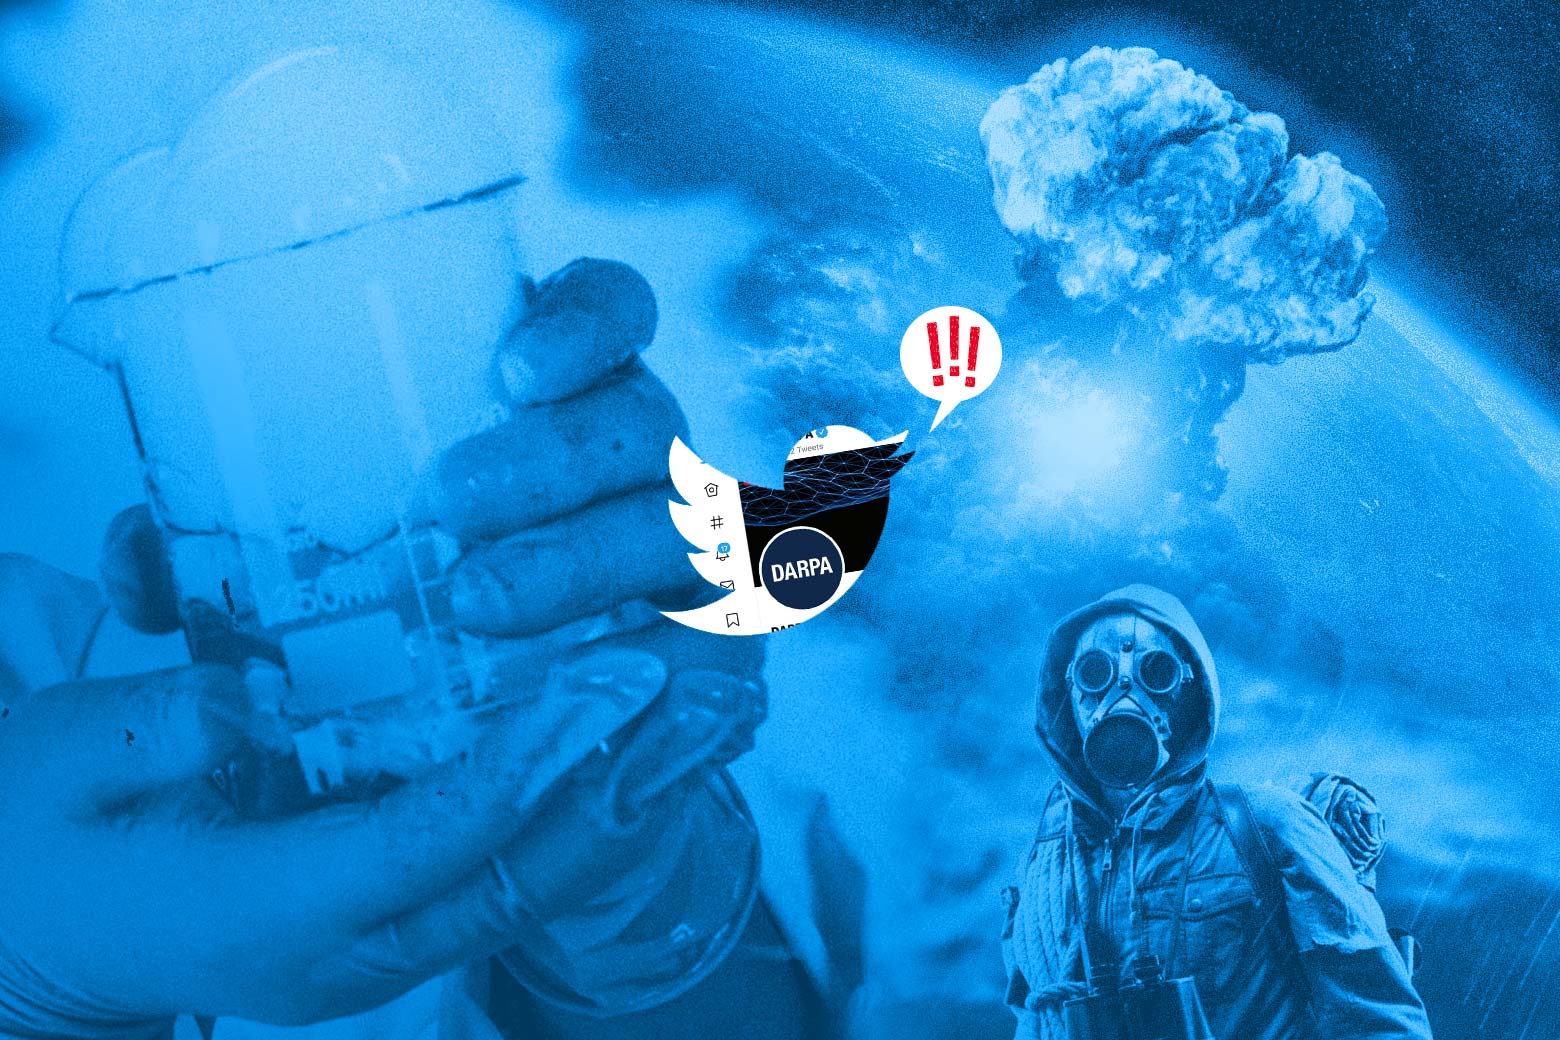 Photo illustration of a spooky beaker, a person wearing a gas mask, and an explosion juxtaposed with the Twitter logo.